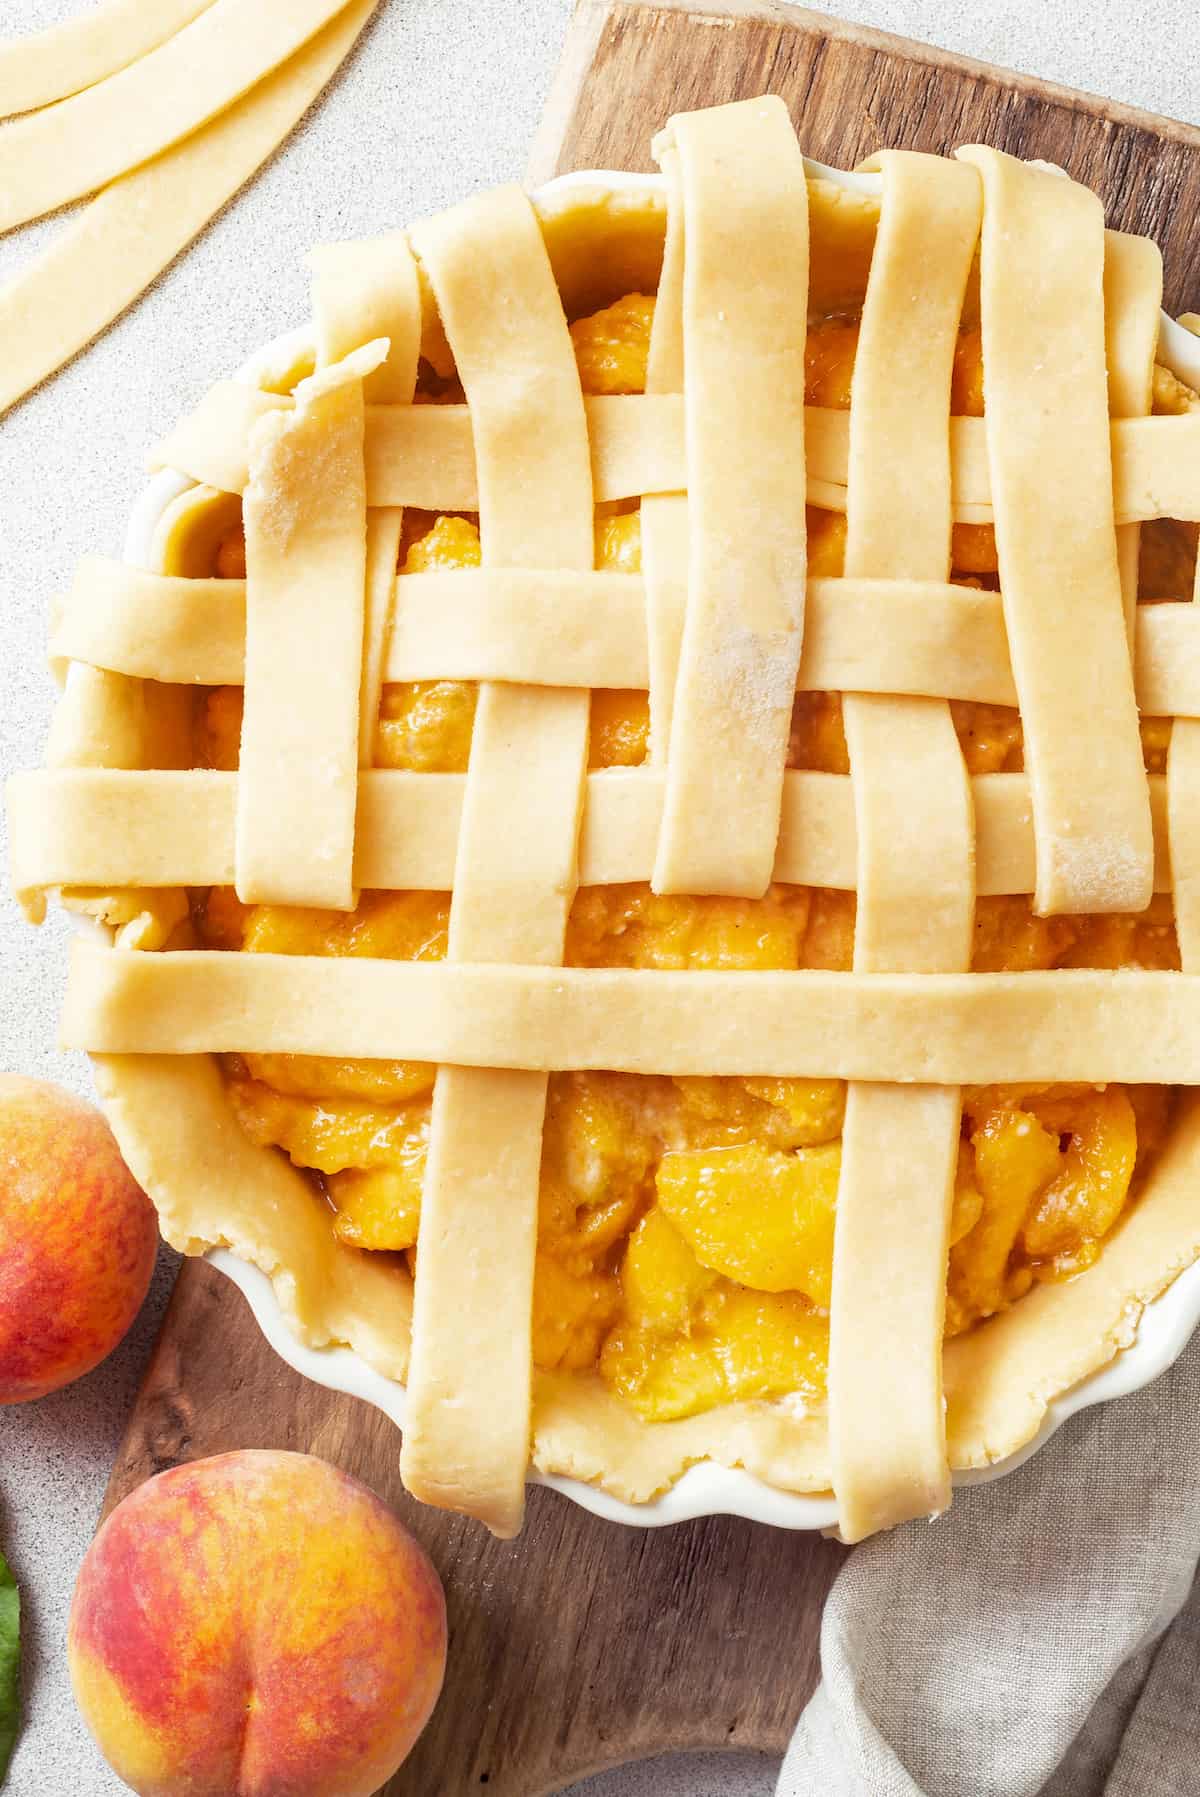 A homemade peach pie with a half-finished lattice crust